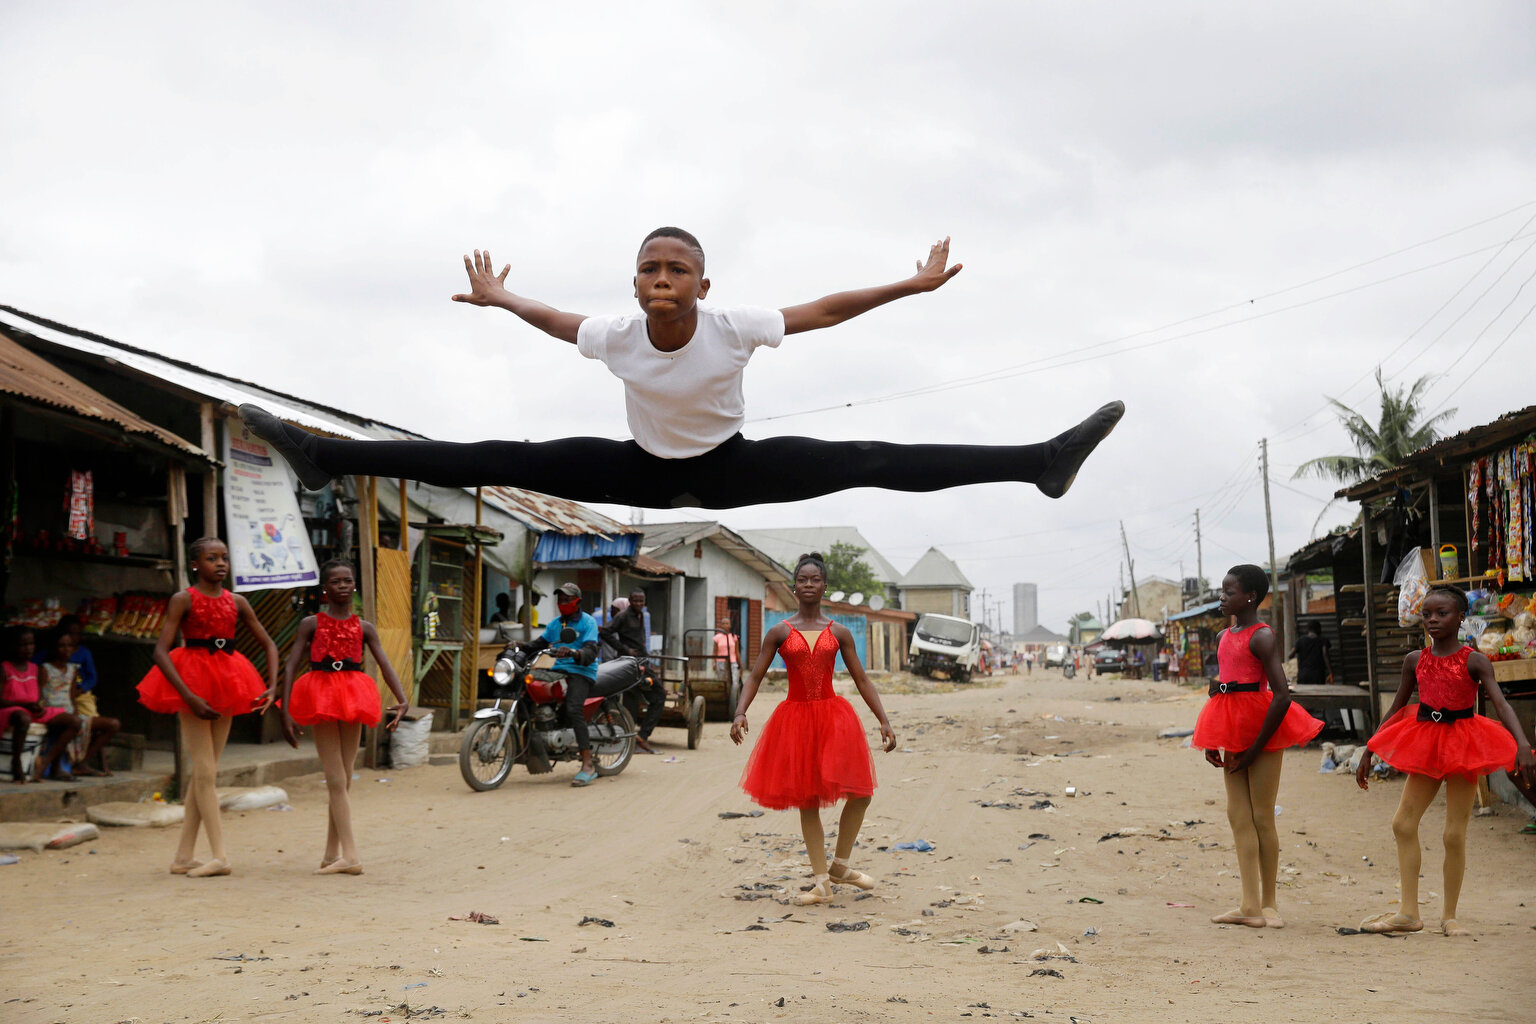  Ballet student Anthony Mmesoma Madu, center, dances in the street as fellow dancers look on in Lagos, Nigeria on Aug. 18, 2020. Cellphone video showing the 11-year-old dancing barefoot in the rain went viral on social media. Madu's practice dance se